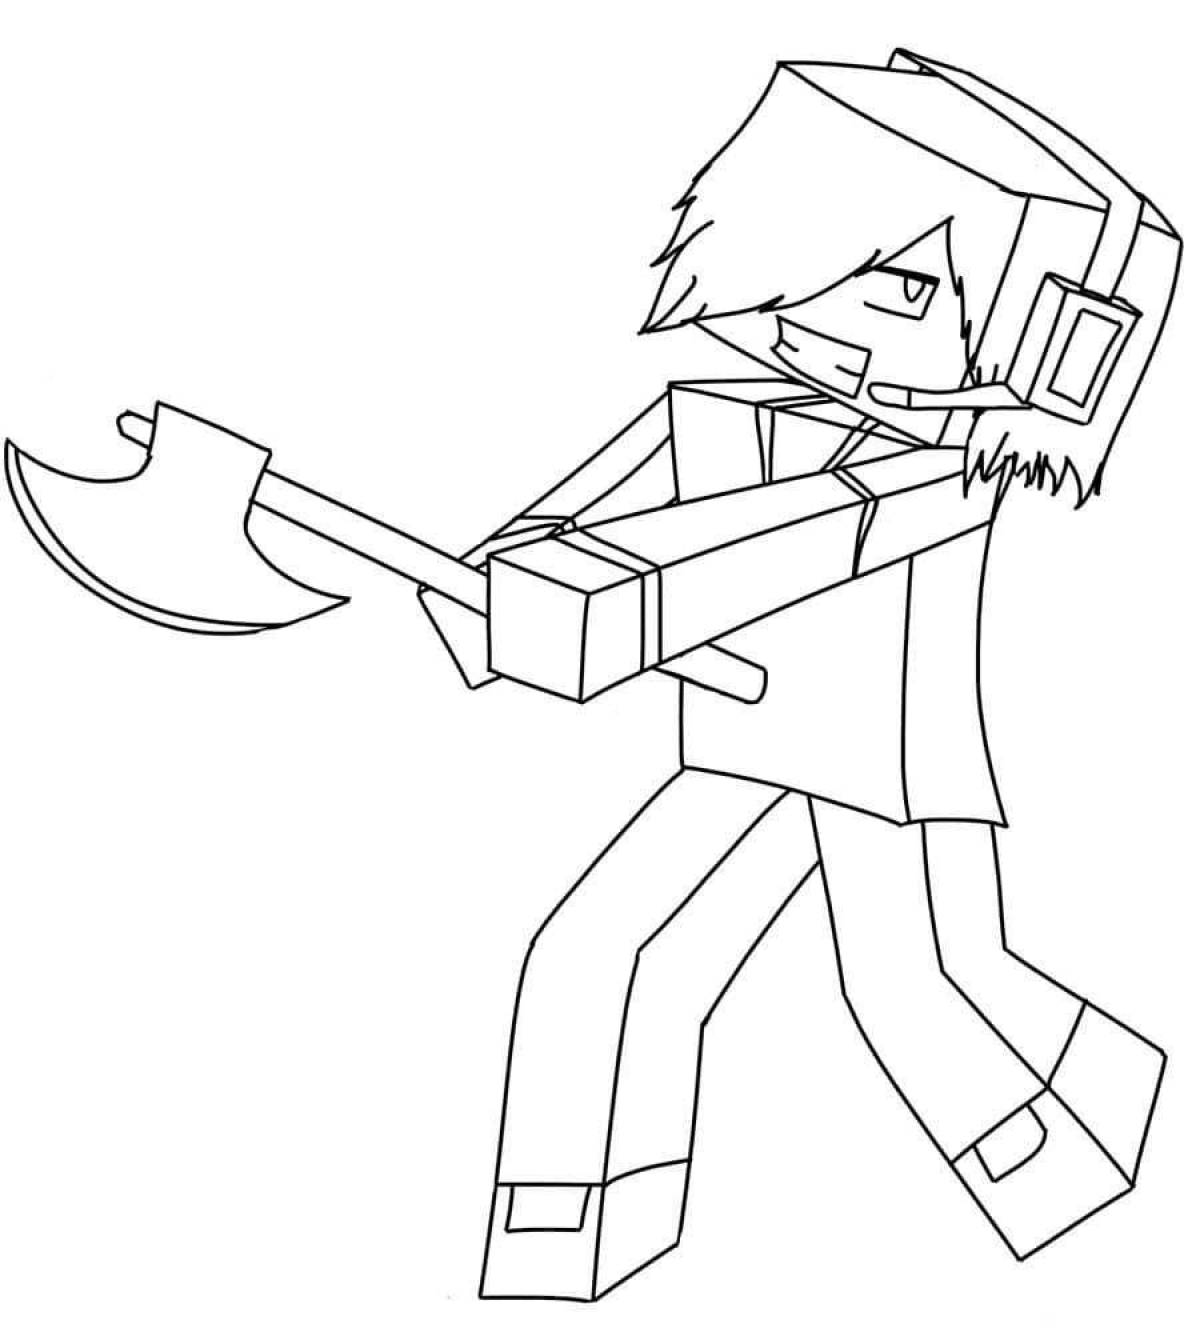 Coloring minecraft dynamic armor